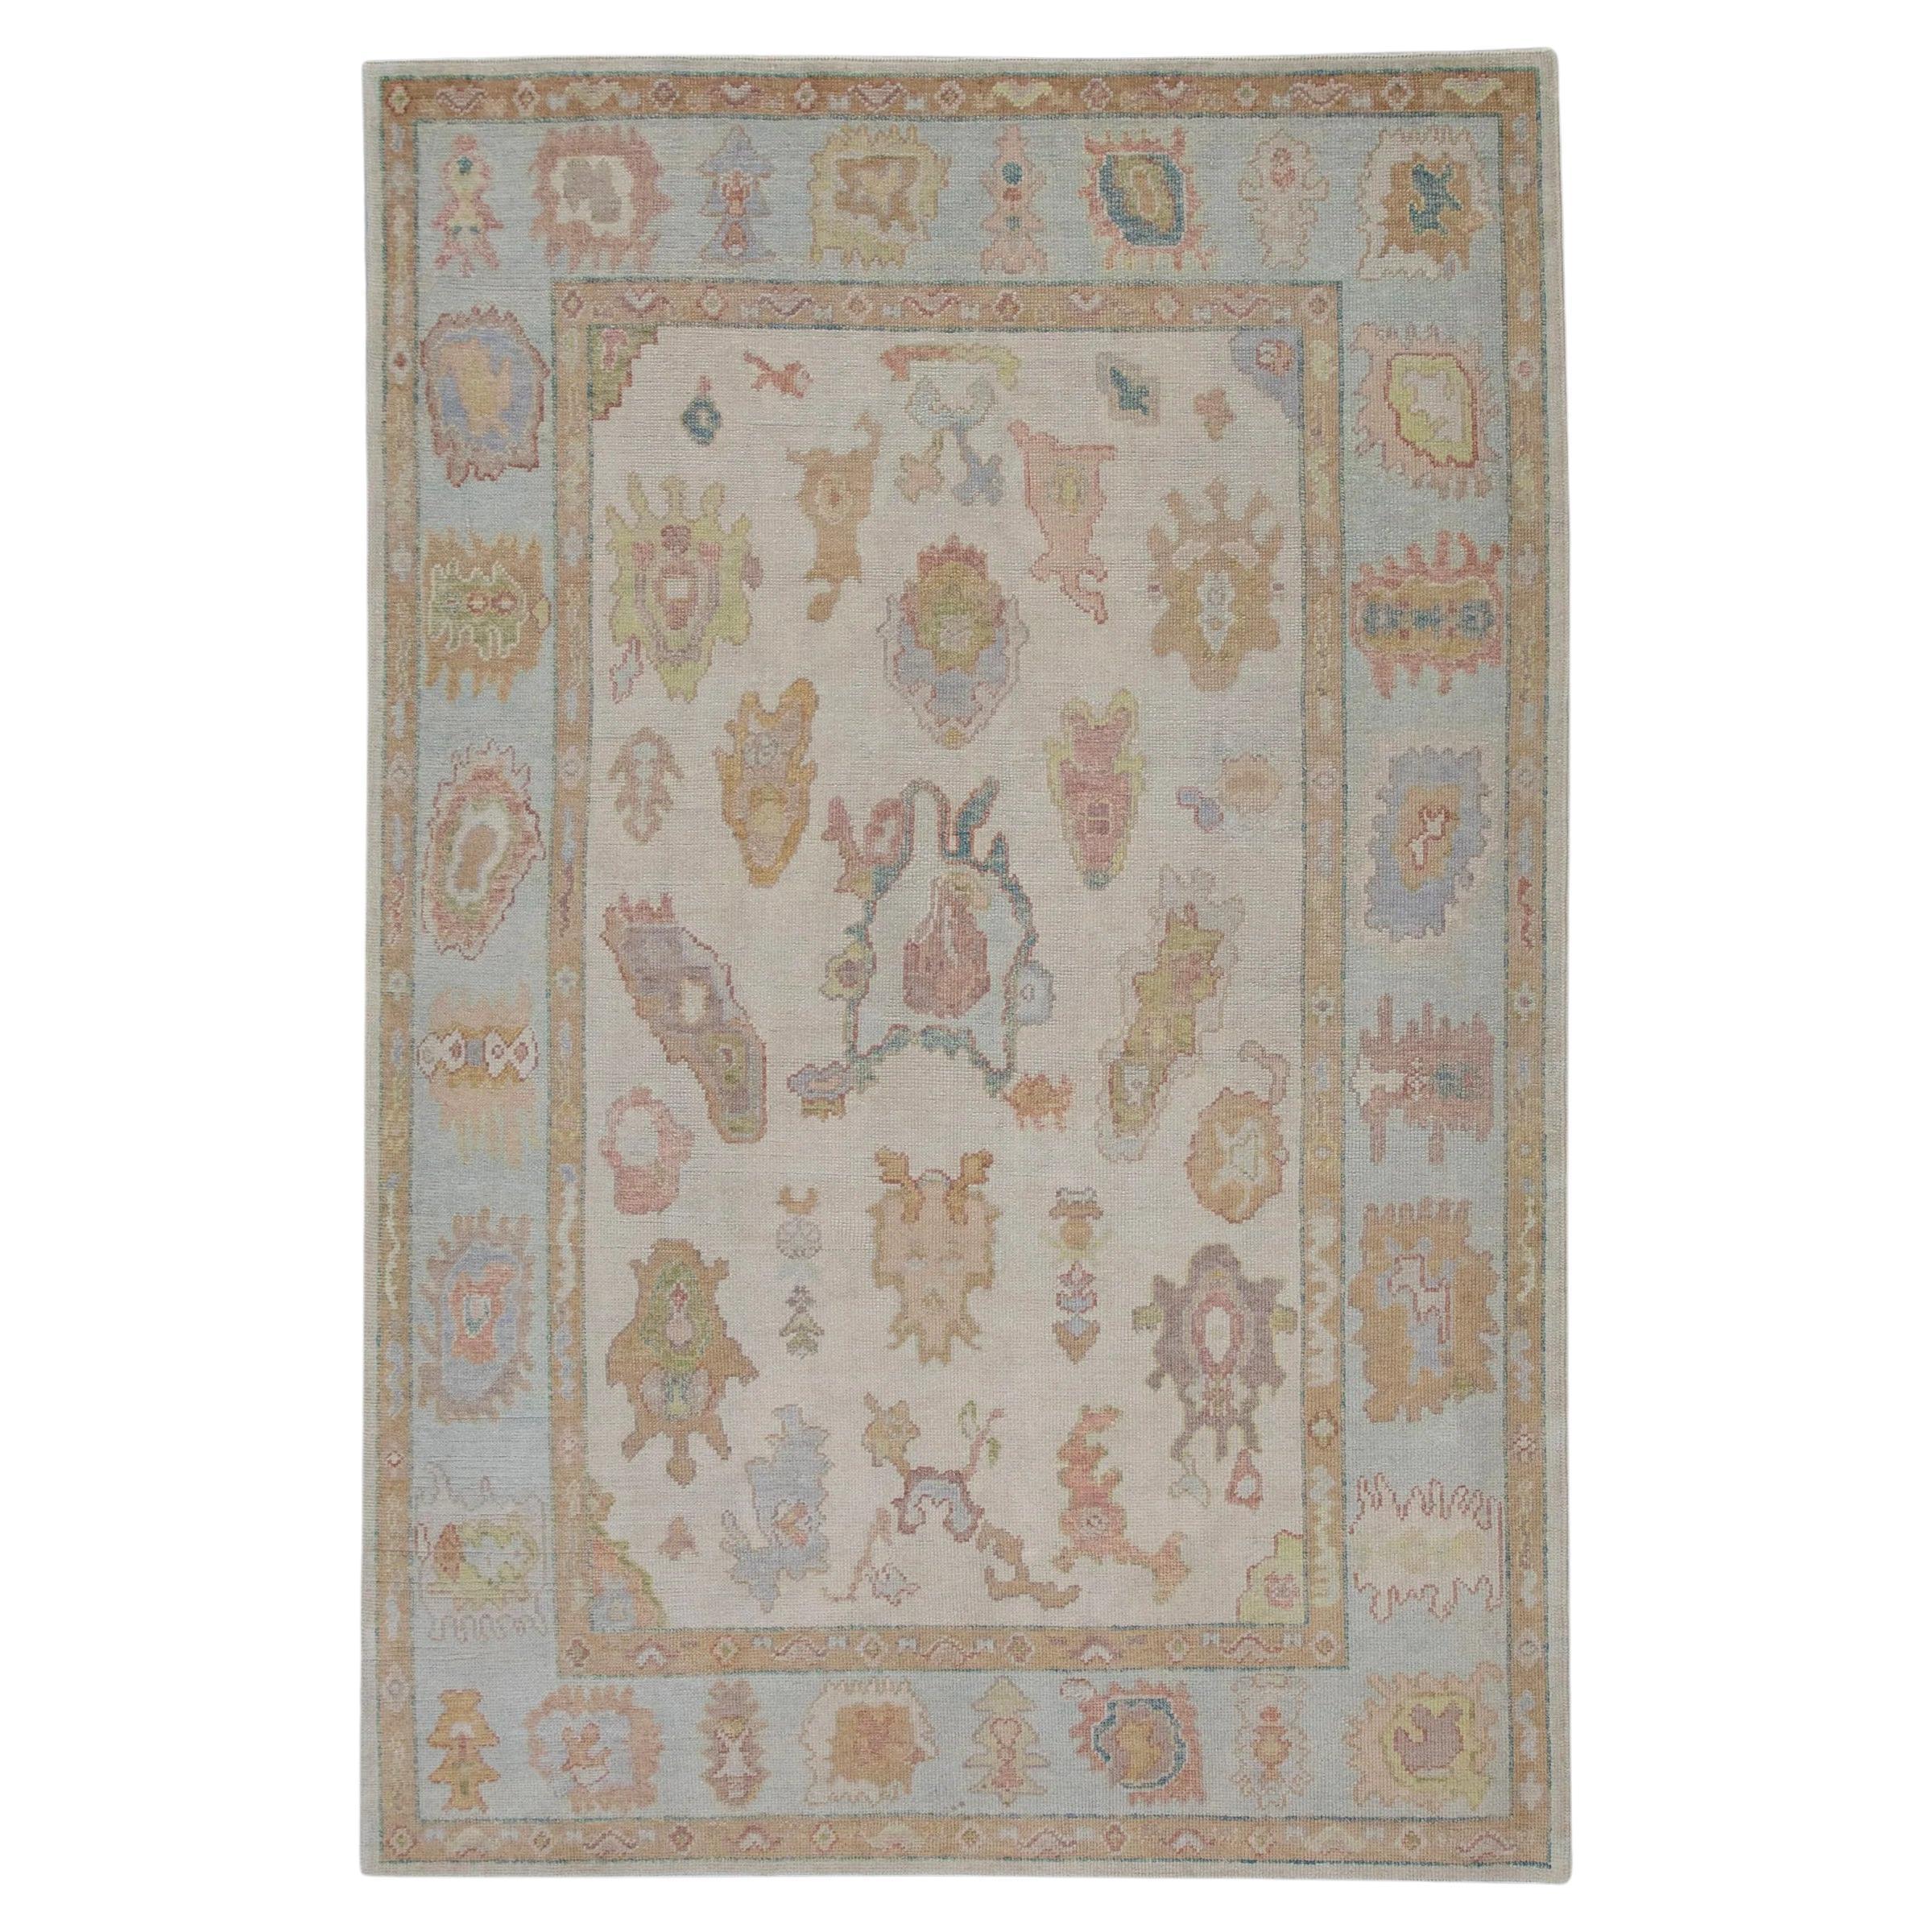 Blue Handwoven Wool Turkish Oushak Rug in Colorful Floral Design 6' x 9'3"